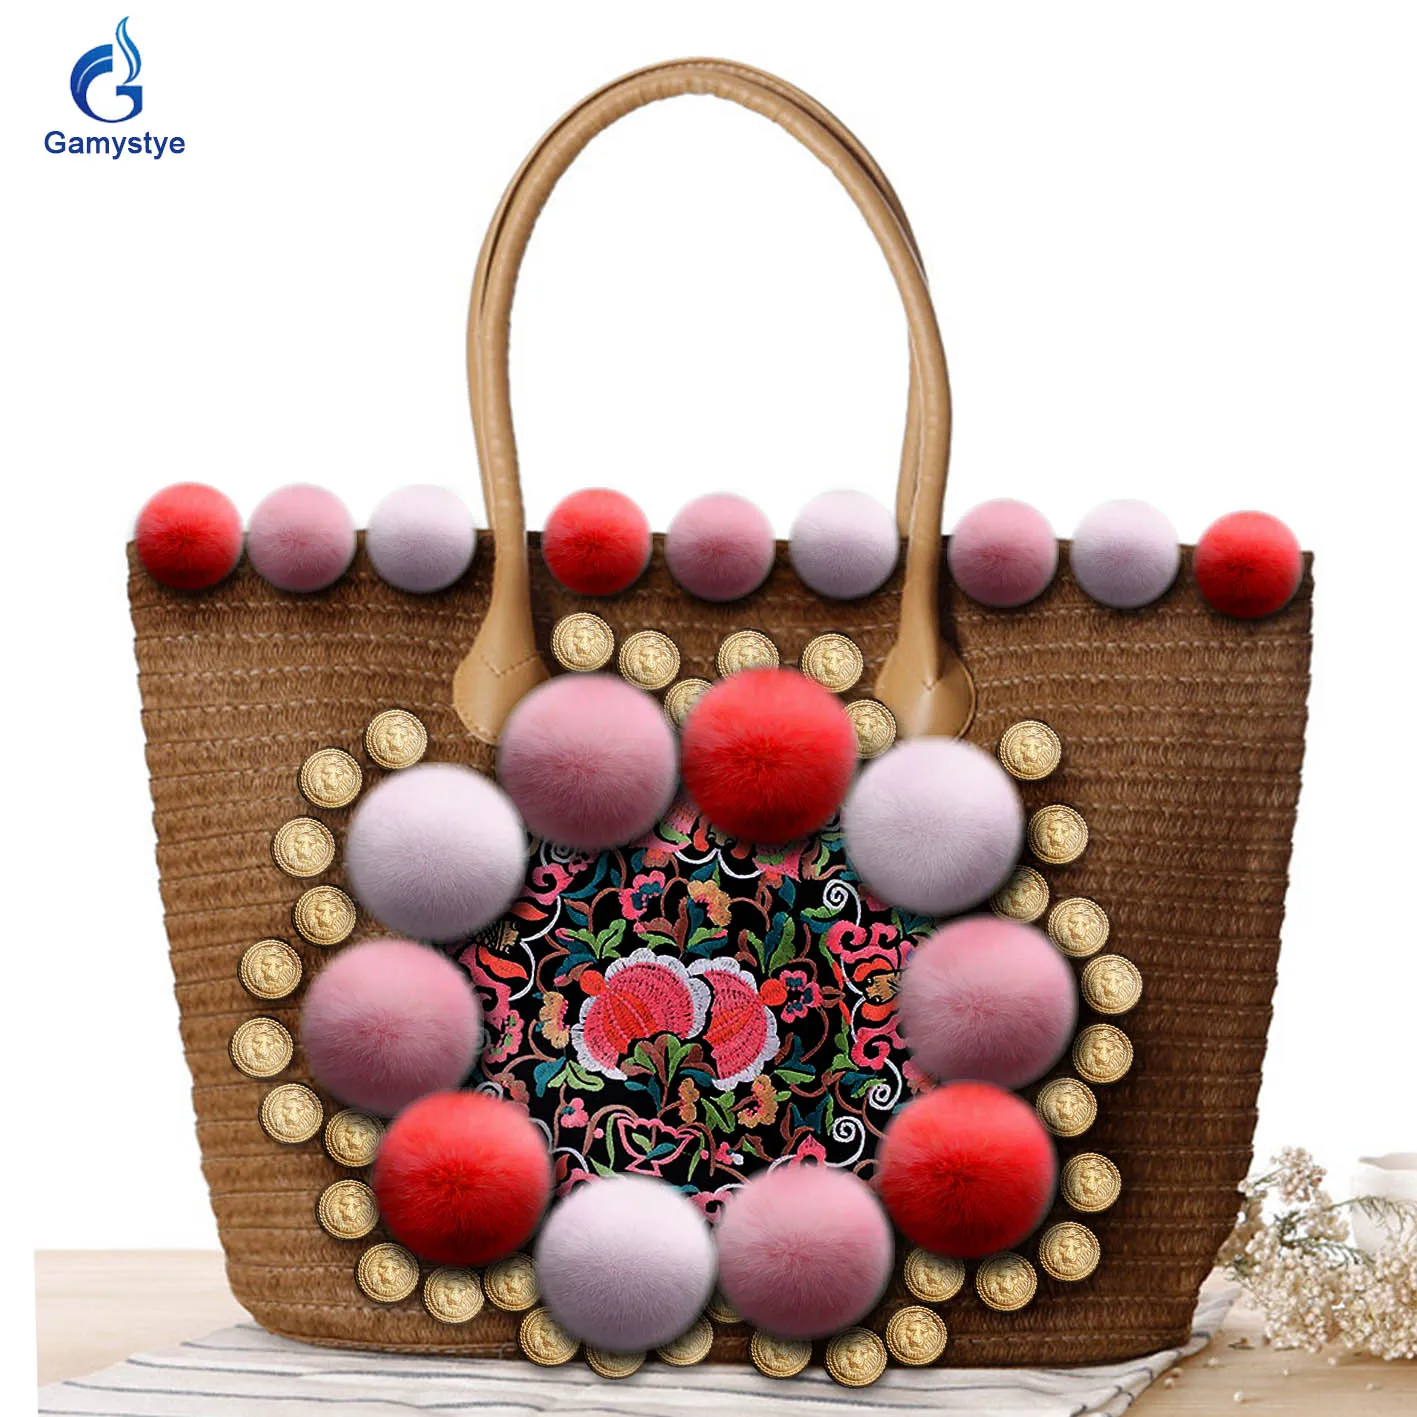 Beach Summer Vacation Handmade Straw Totes Ladies Embroidered Tote Handbags Messenger Shoulder Bag For women Woven Straw Rattan